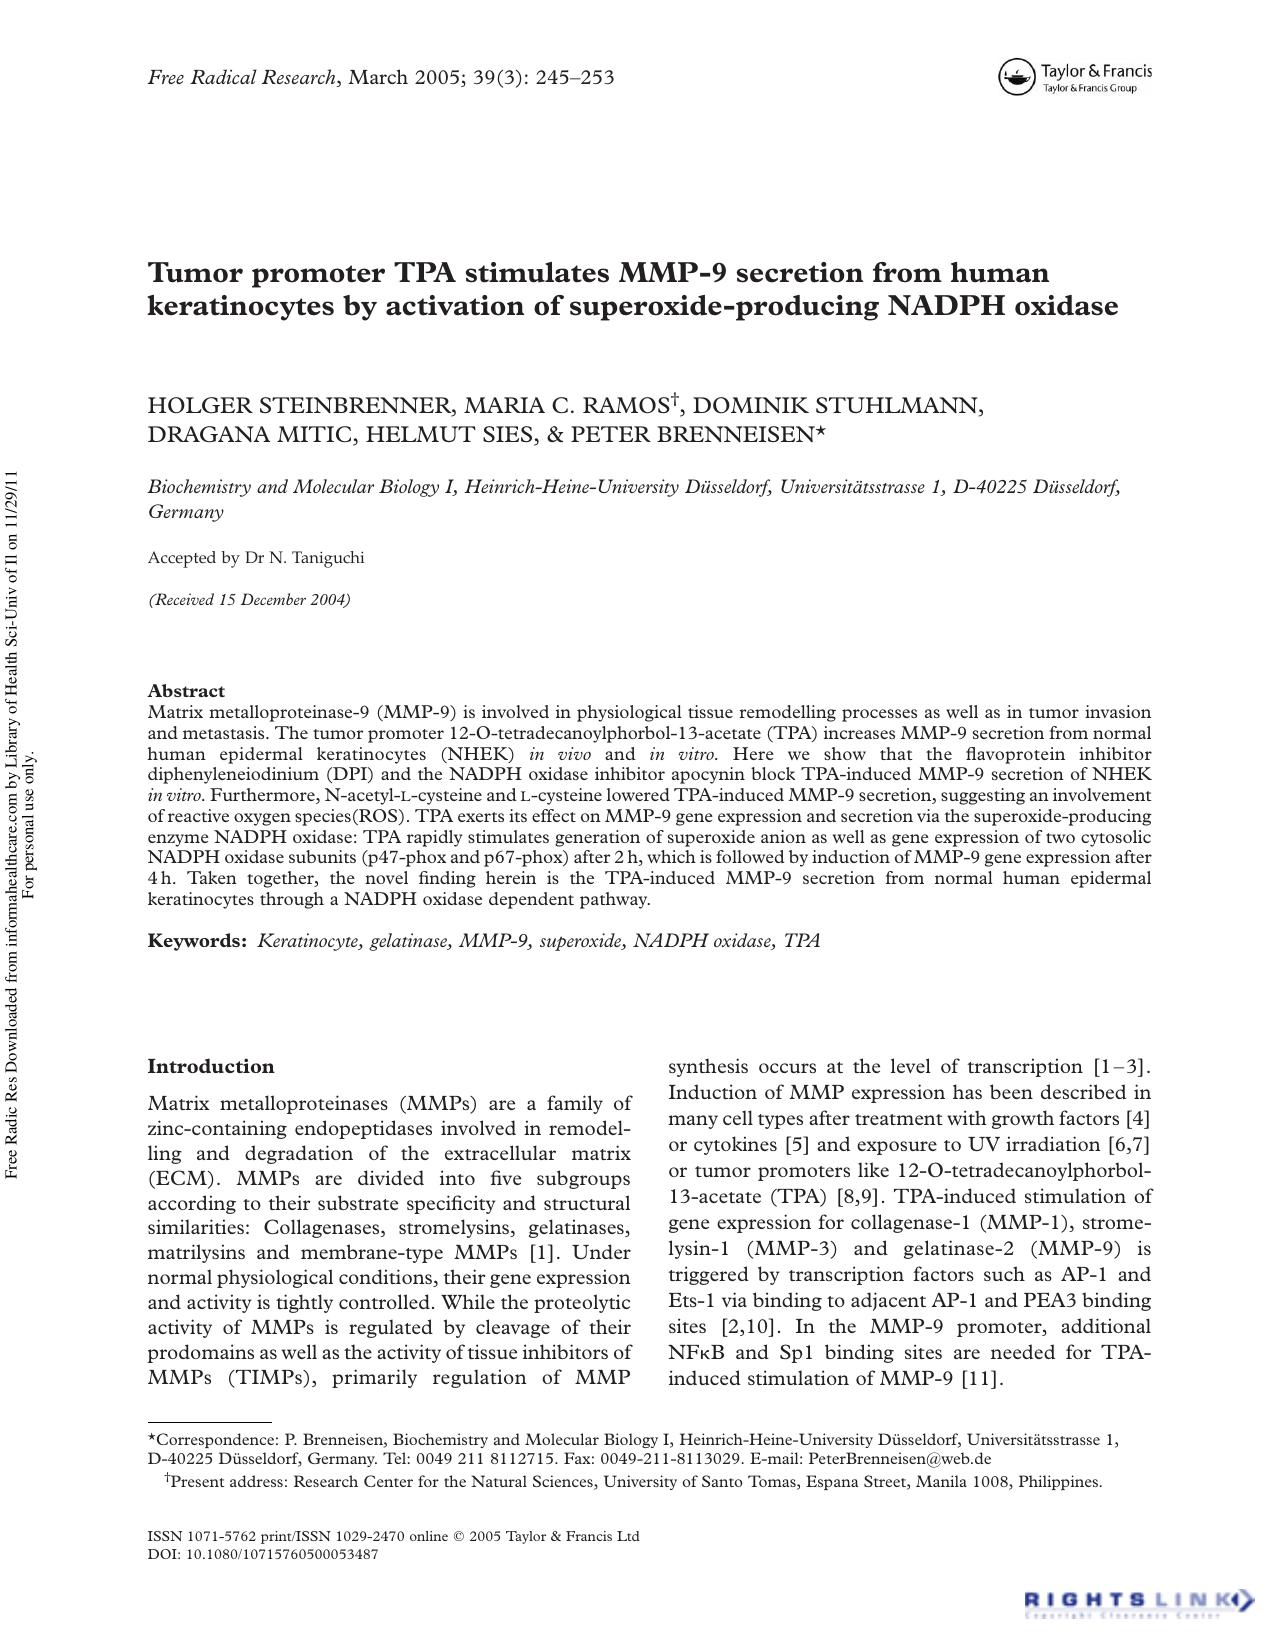 Tumor promoter TPA stimulates MMP-9 secretion from human keratinocytes by activation of superoxide-producing NADPH oxidase by unknow